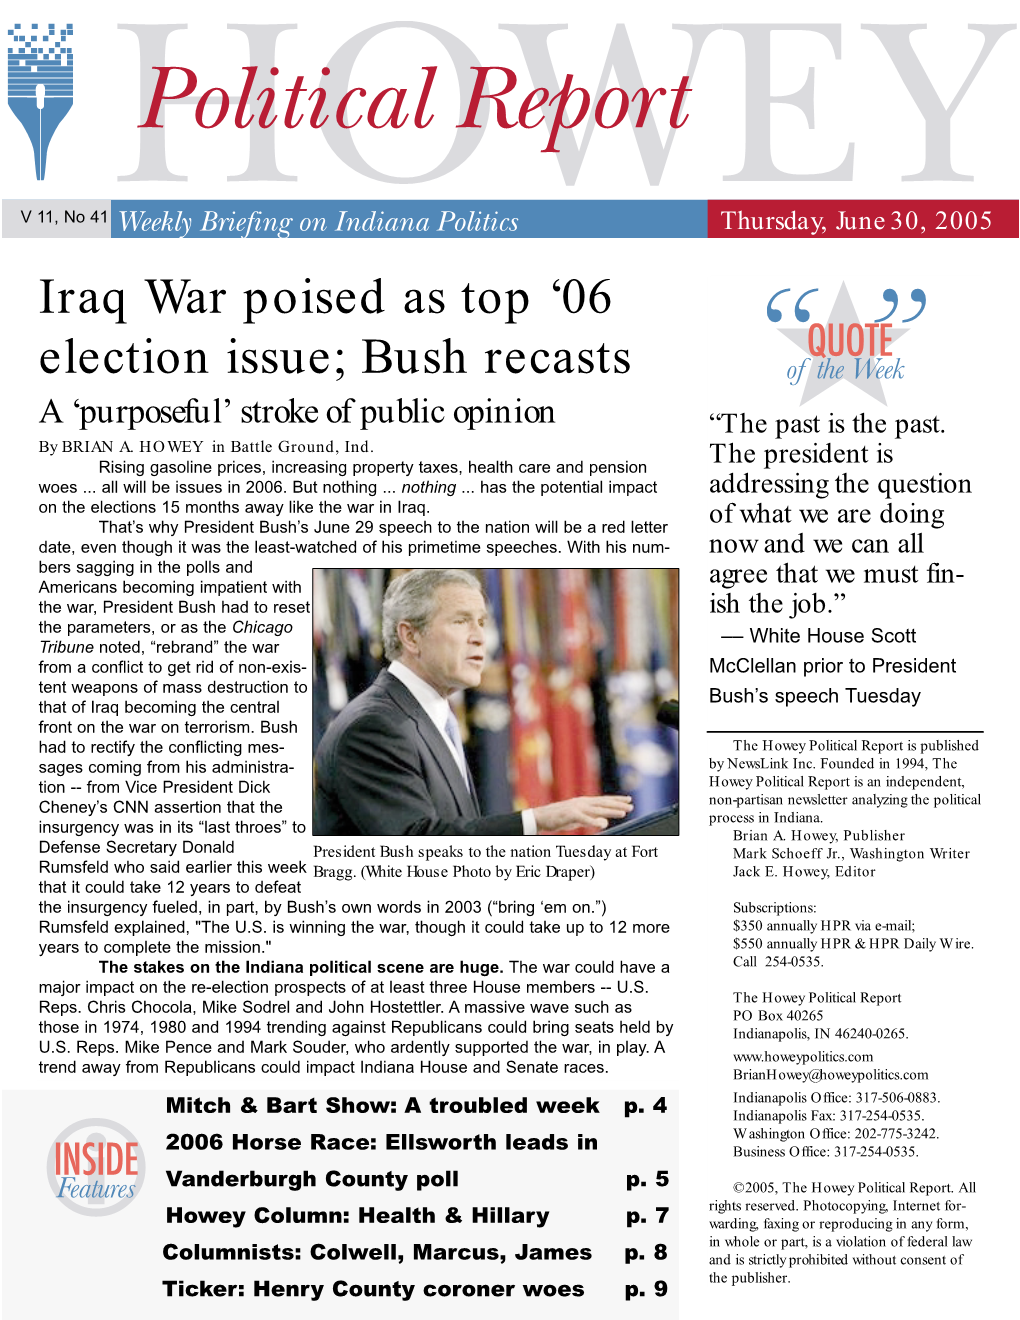 06 Election Issue; Bush Recasts a ‘Purposeful’ Stroke of Public Opinion “The Past Is the Past